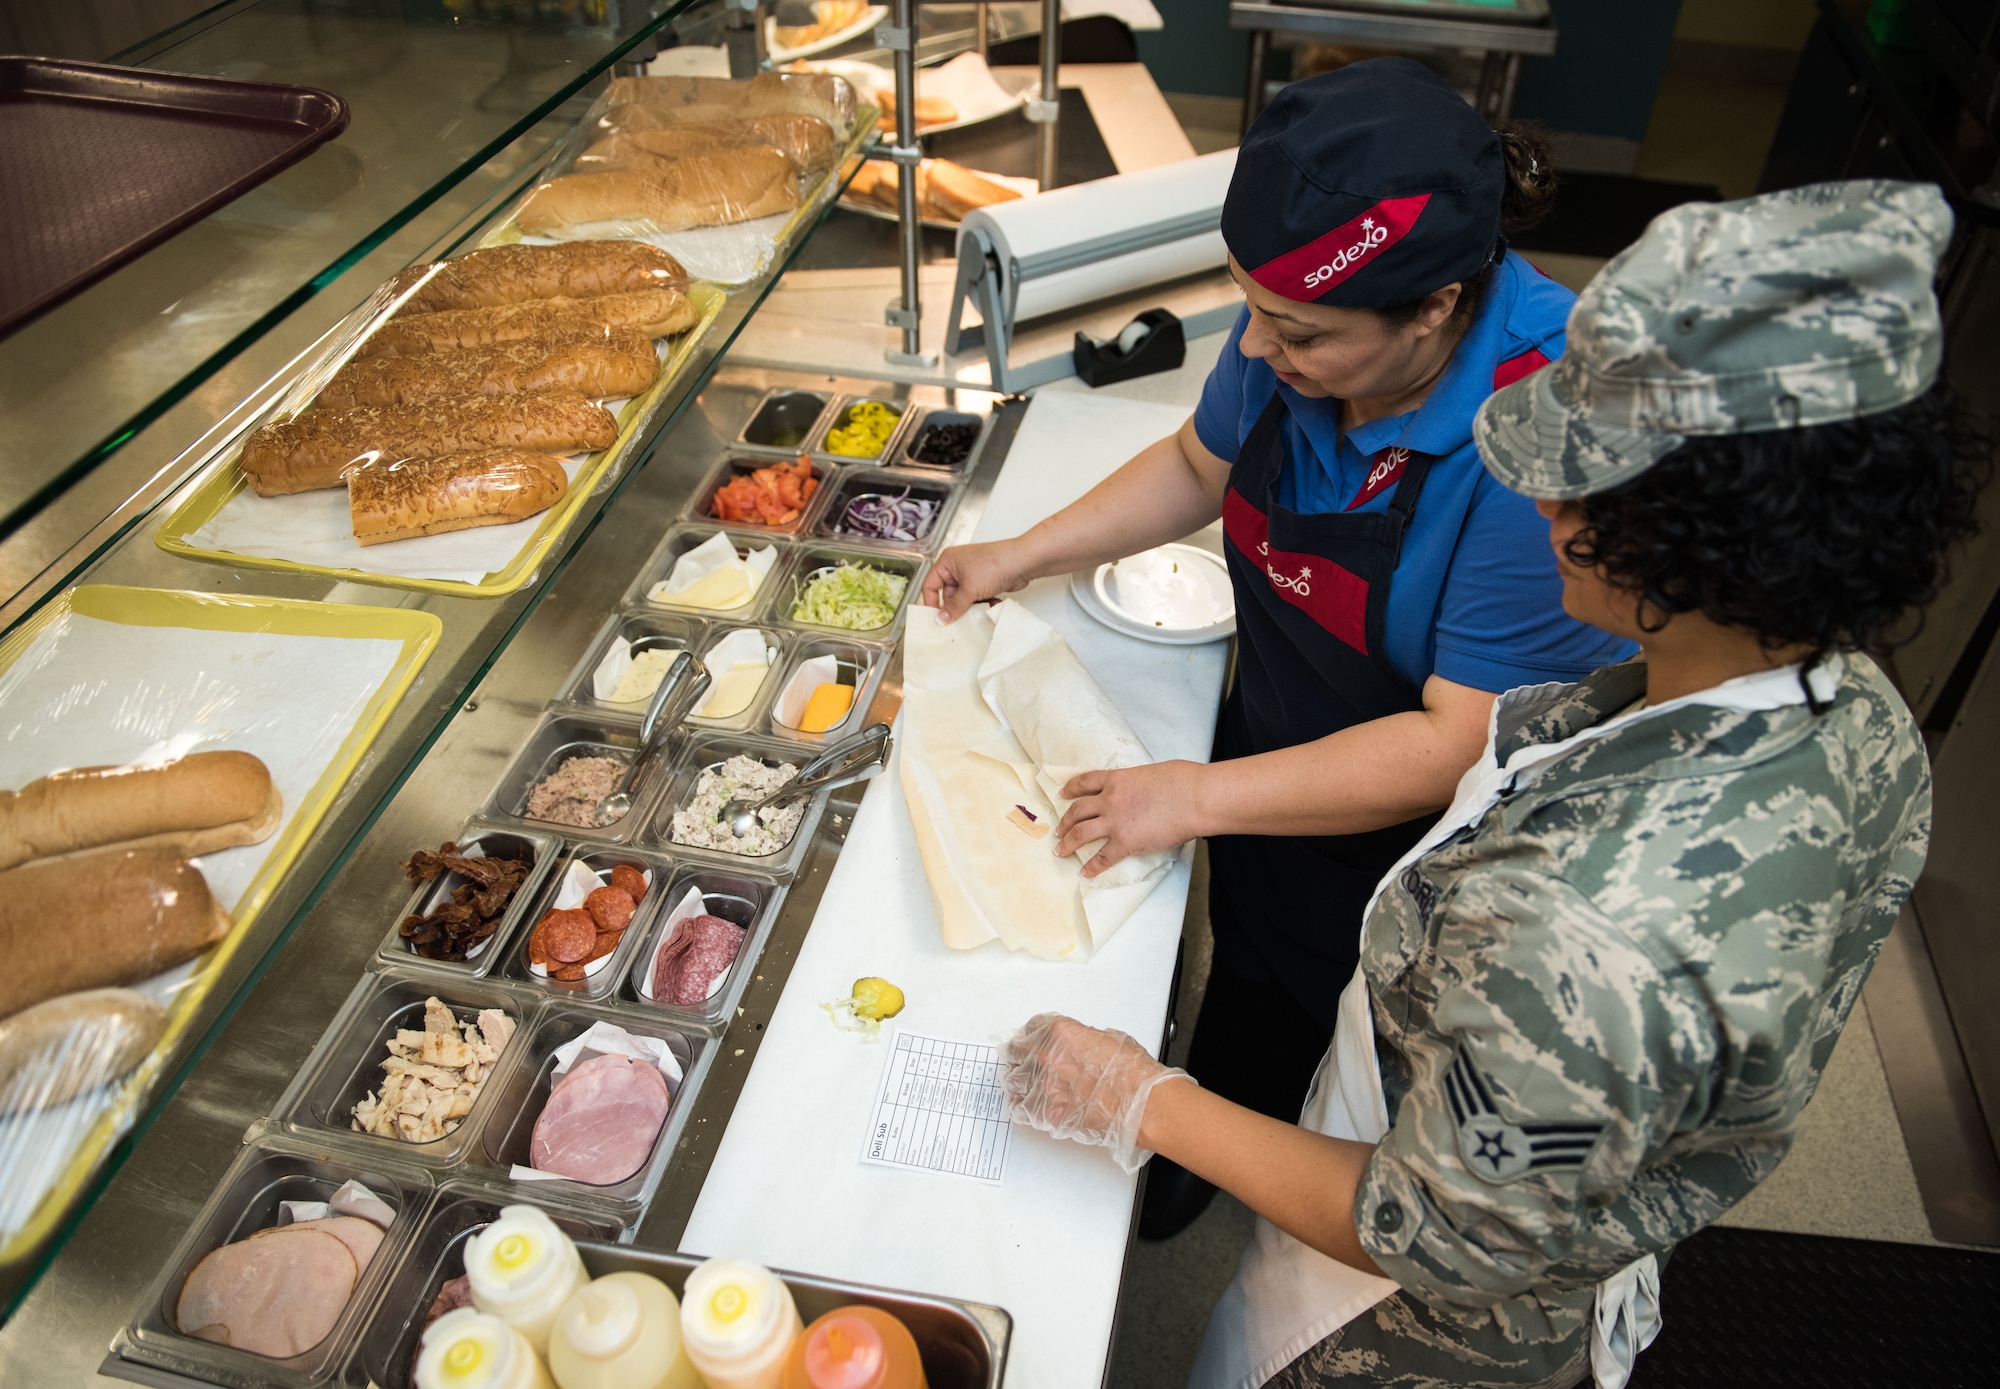 Senior Airman Leatha Brown, 446th Force Support Squadron services specialist, learns how to wrap a sandwich at the Contrails Dining Facility on Beale Air Force Base, April 23.  The Reservists from Joint Base Lewis-McChord were at Beale for their annual training in various duties including food service, fitness, recreation and mortuary affairs. (U.S. Air Force photo by Staff Sgt. Brenda Davis)